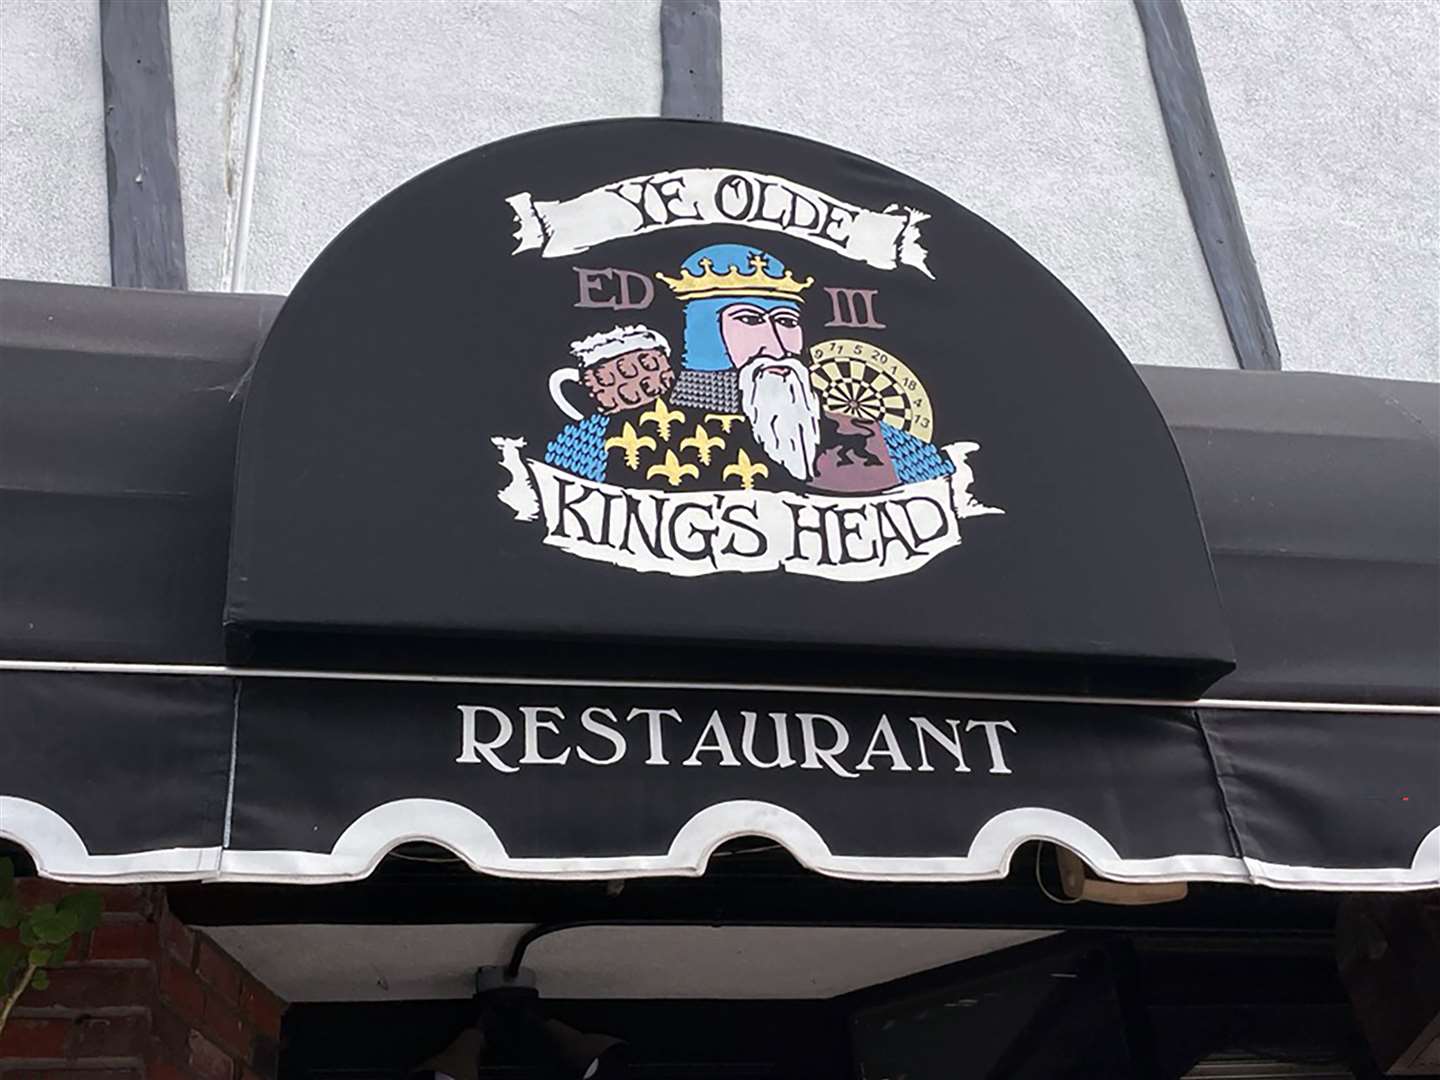 A general view of the entrance to Ye Olde King’s Head pub in Santa Monica, California (Mike Bedigan/PA)